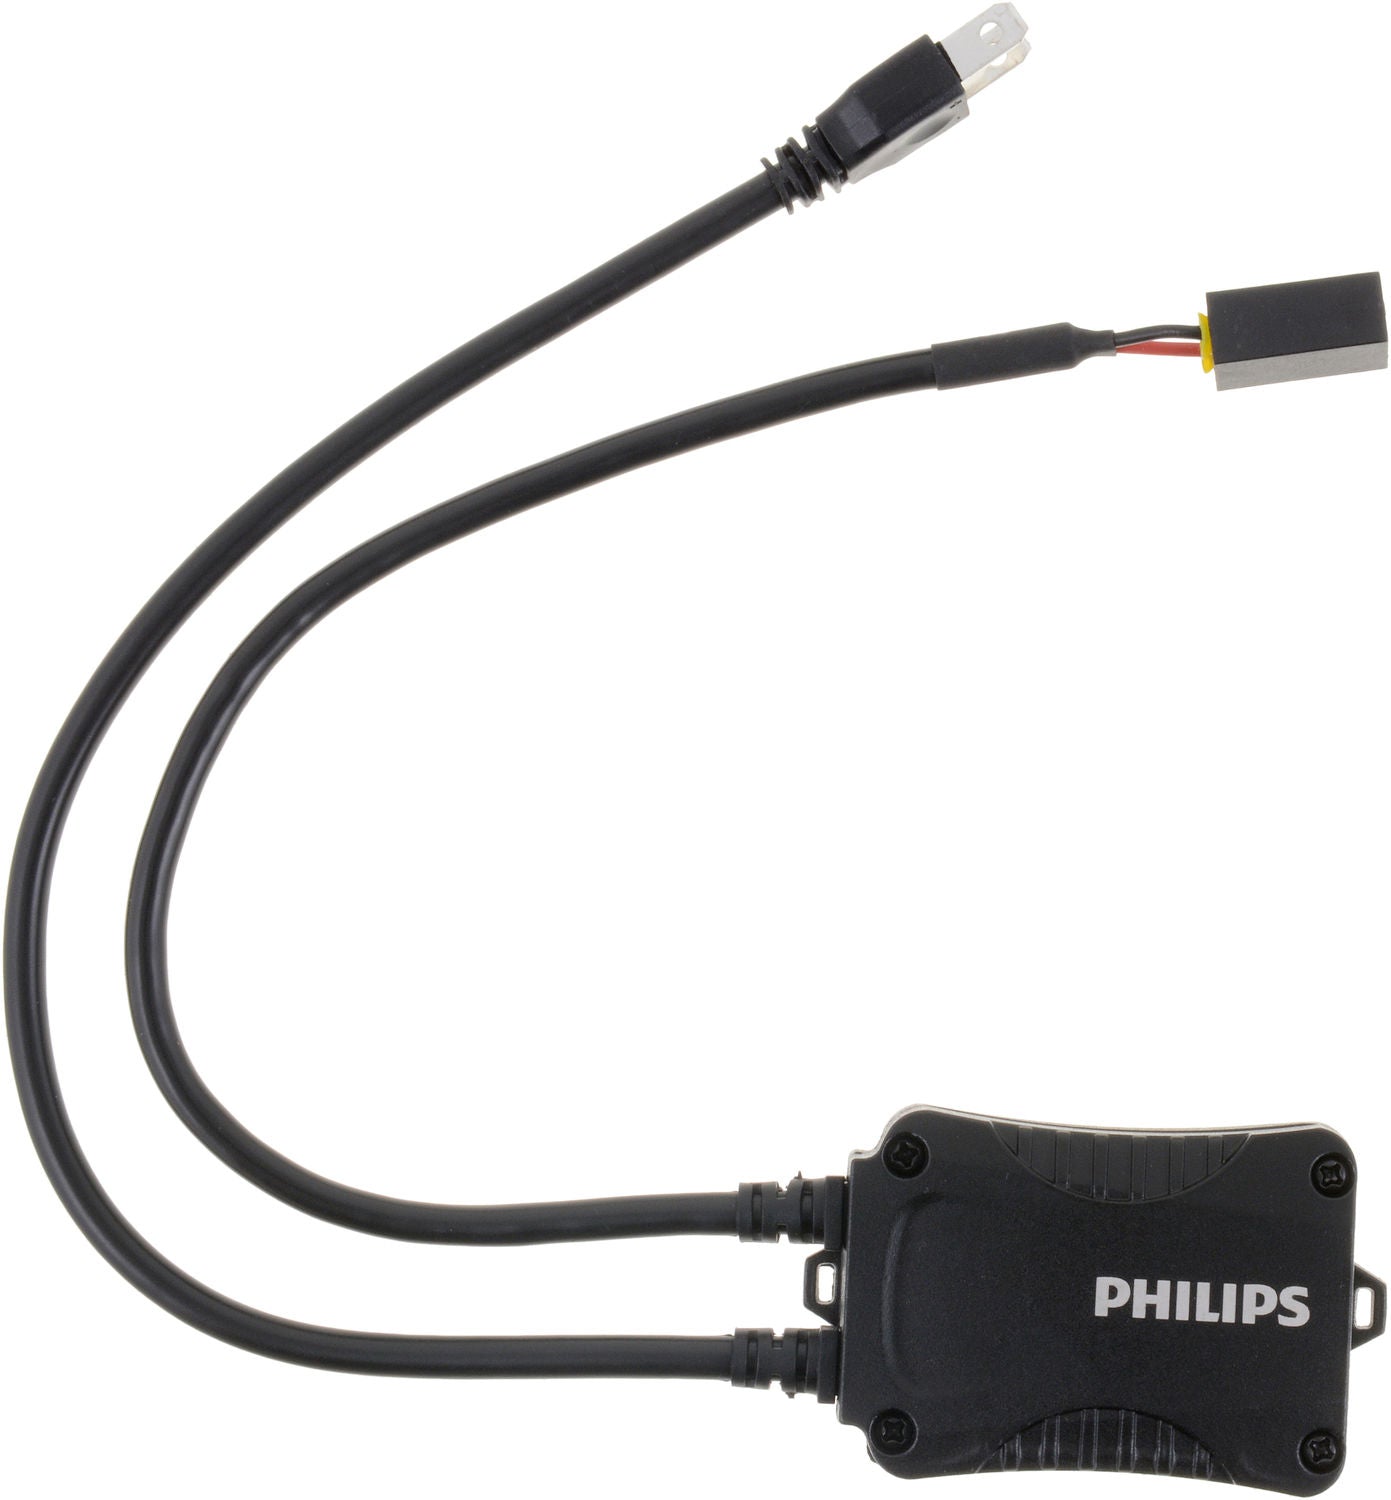 PHILIPS 18952C2 - PHILIPS LED Canbus Adapter H7 (2)